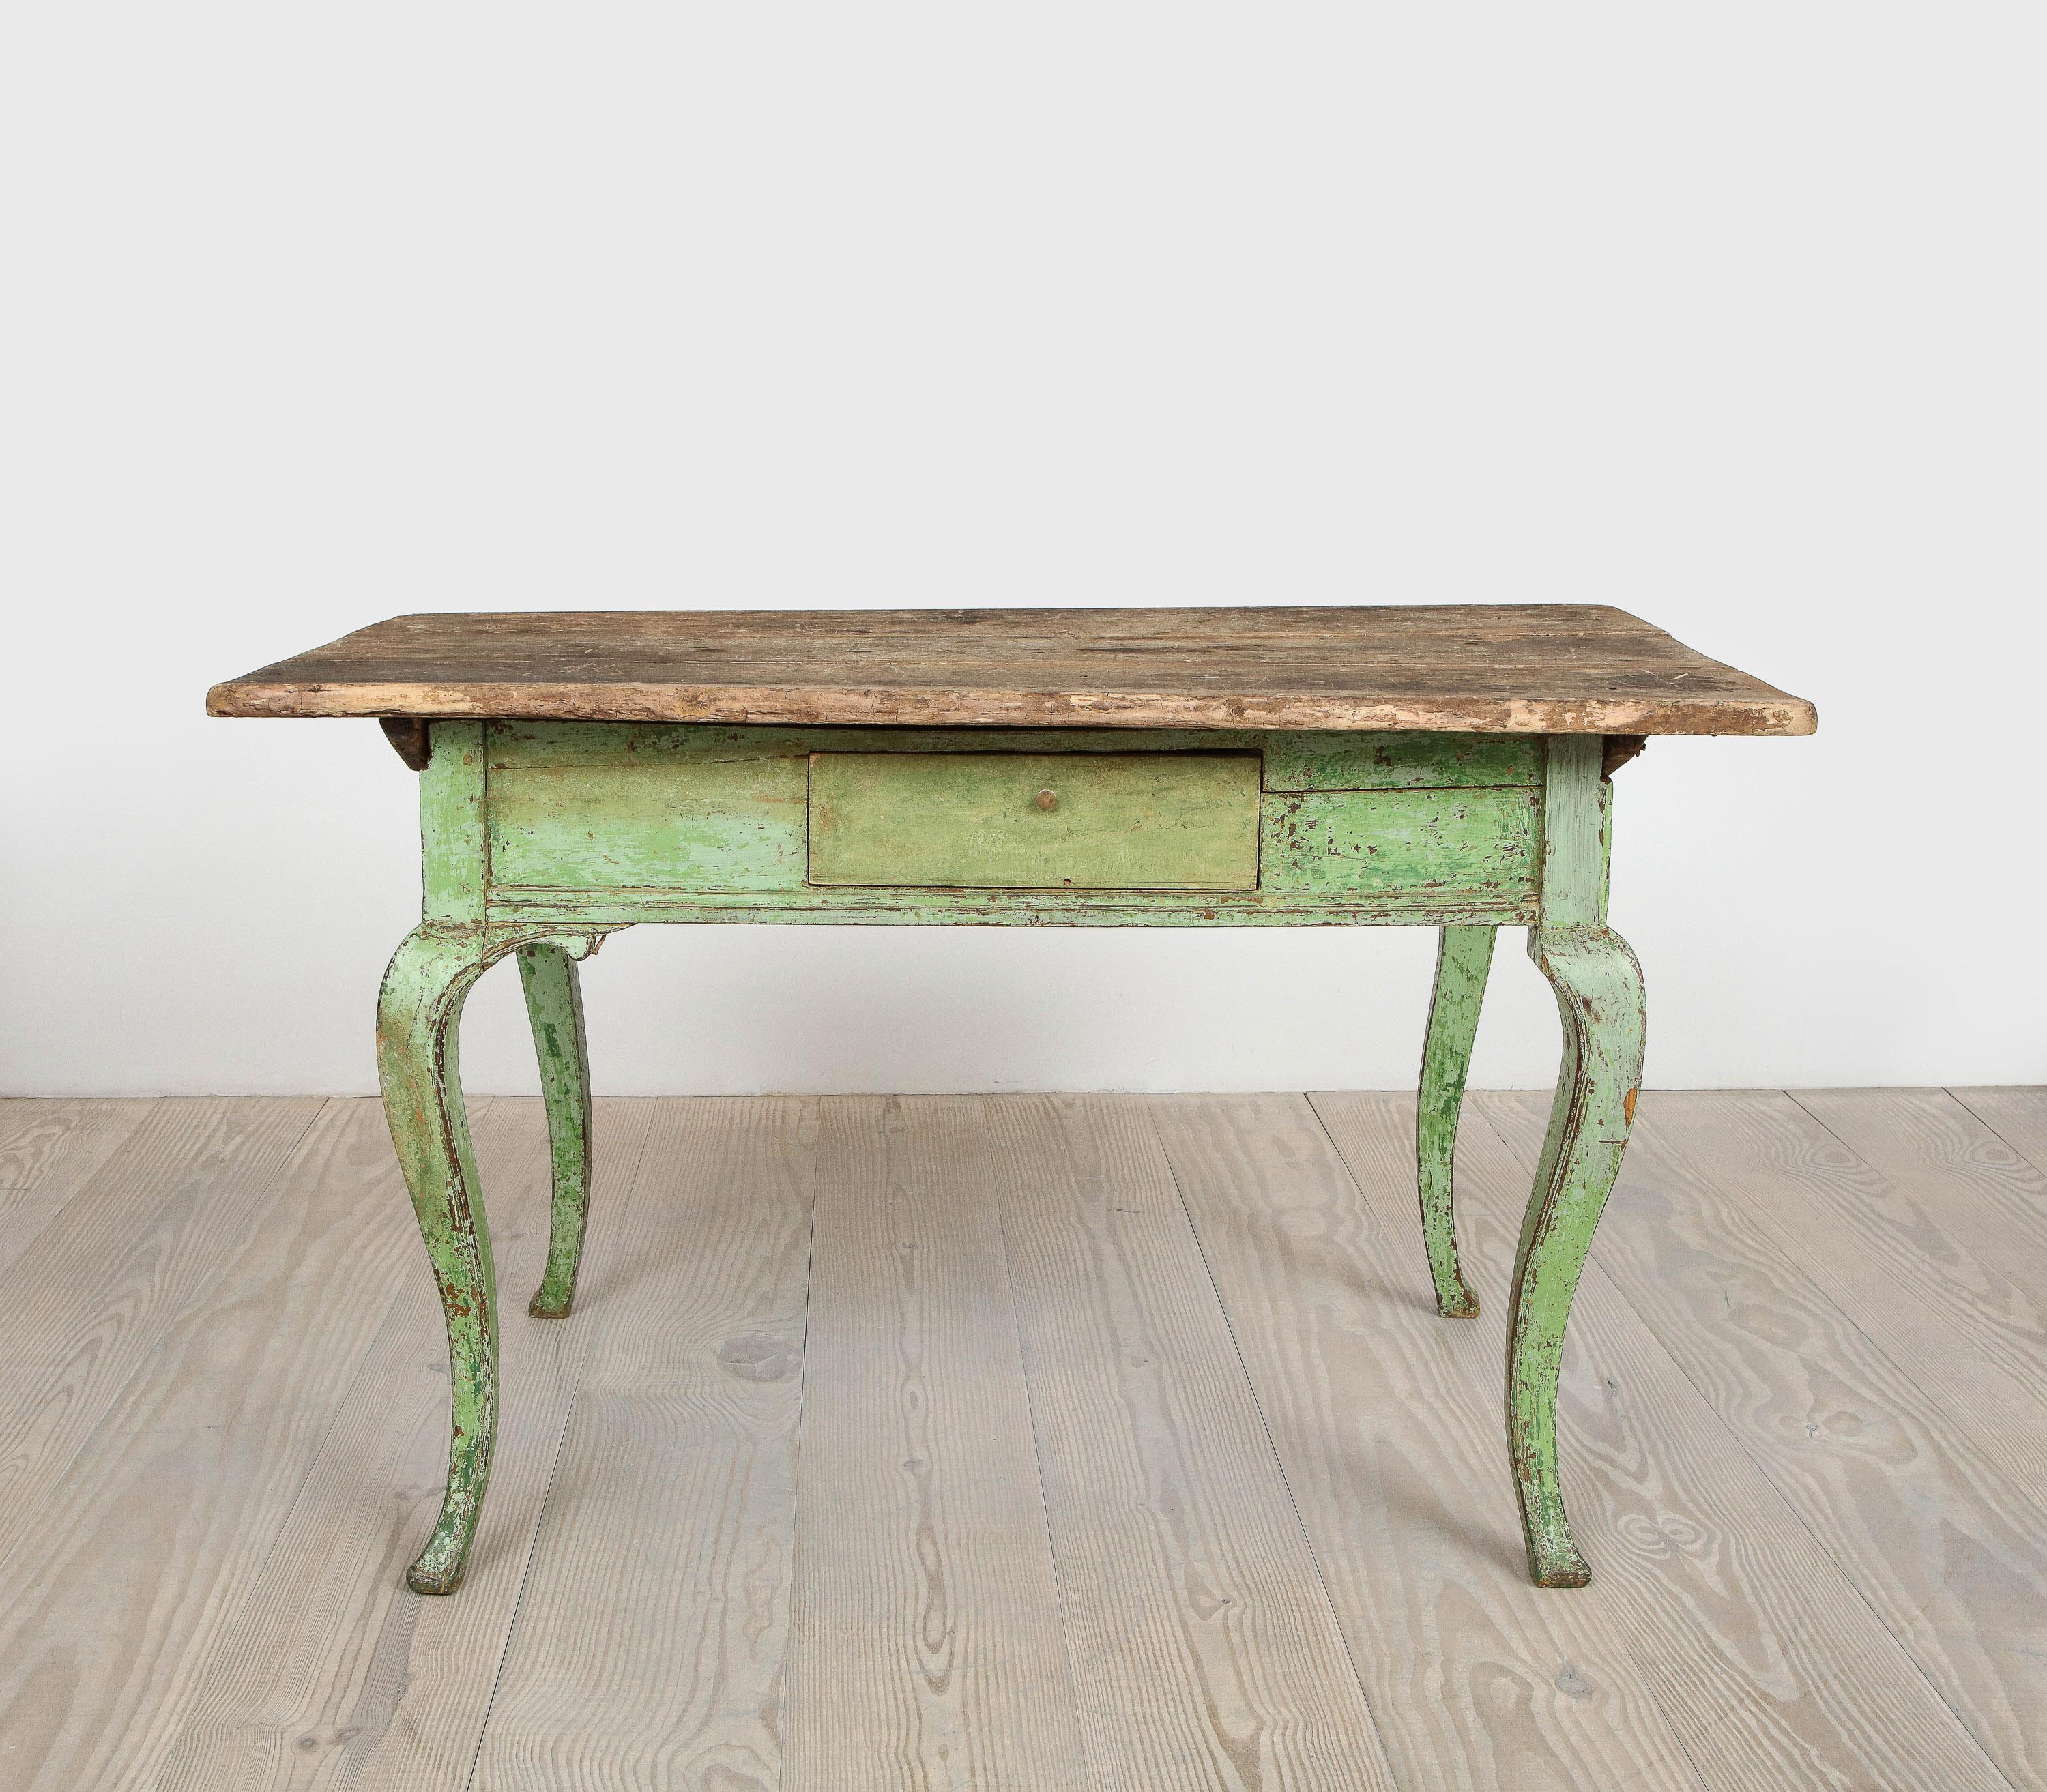 Fantastic Rococo 18th century writing table with single drawer with accentuated cabriole legs, origin: Sweden, circa 1760 with all original green color.

The purity of the design lacking any adornments along with the pared down elements of this